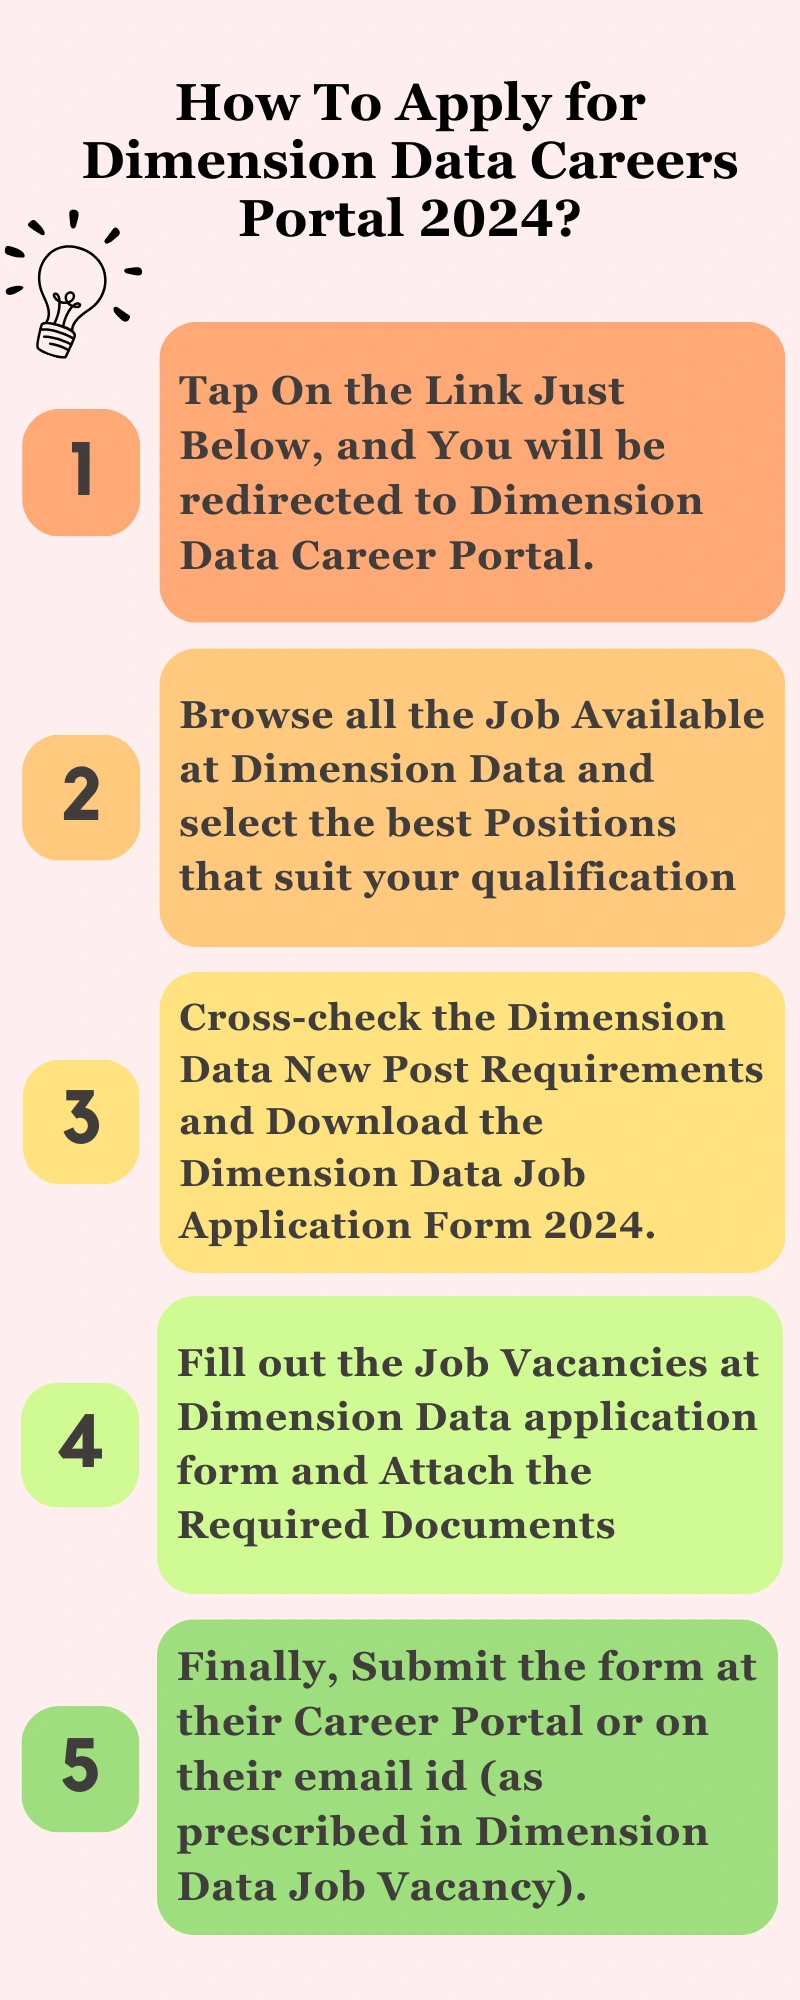 How To Apply for Dimension Data Careers Portal 2024?